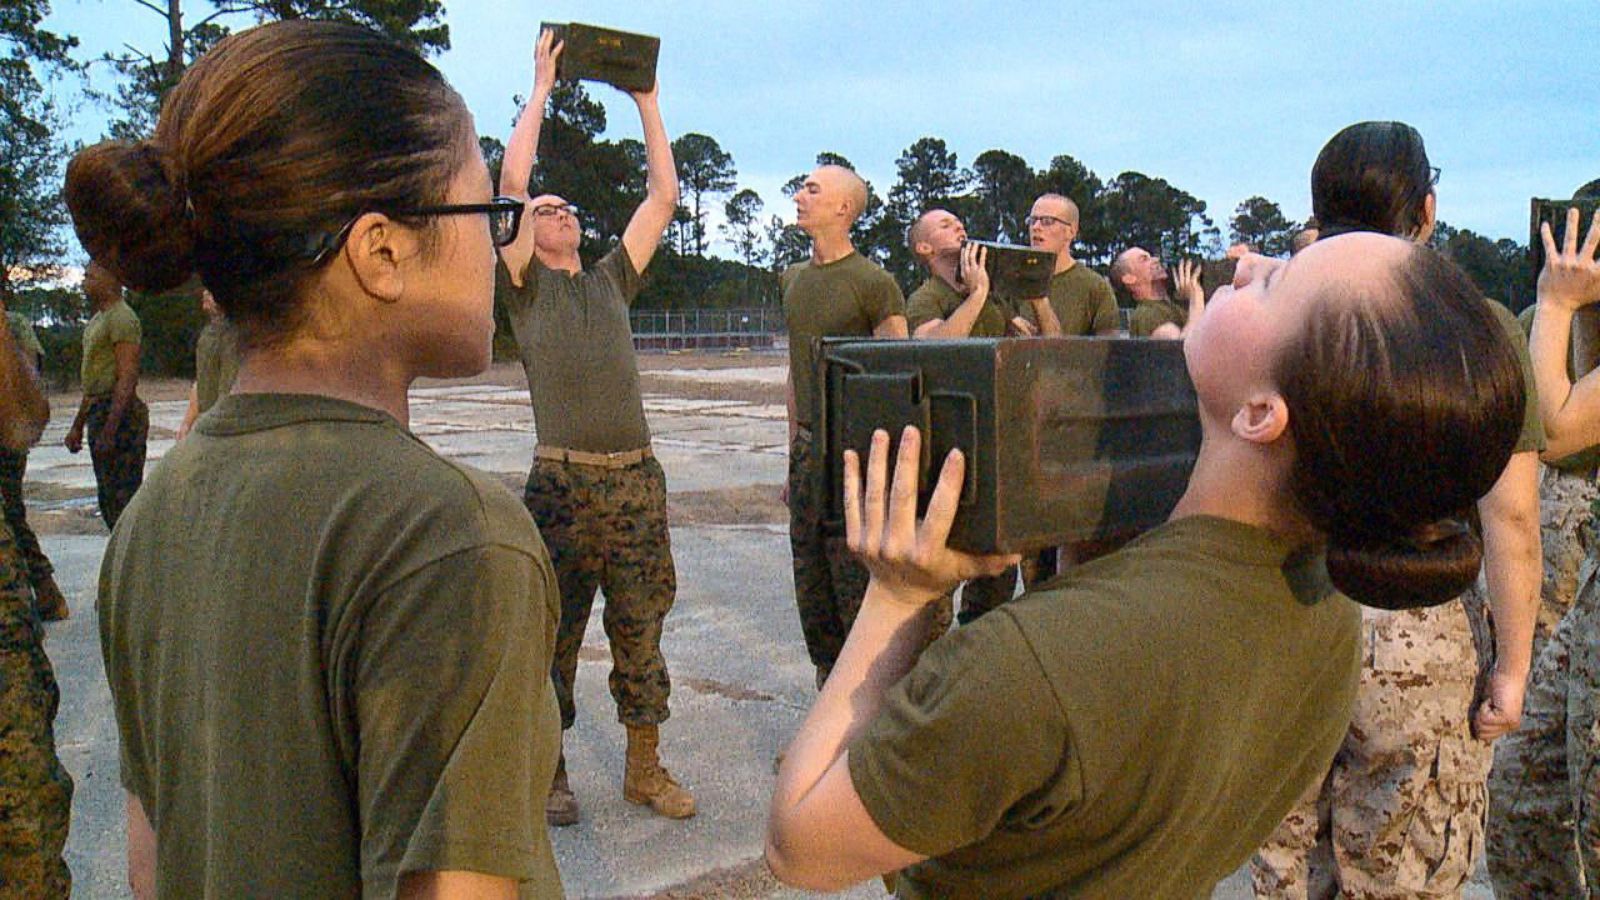 At boot camp, Marine Corps working to integrate training in